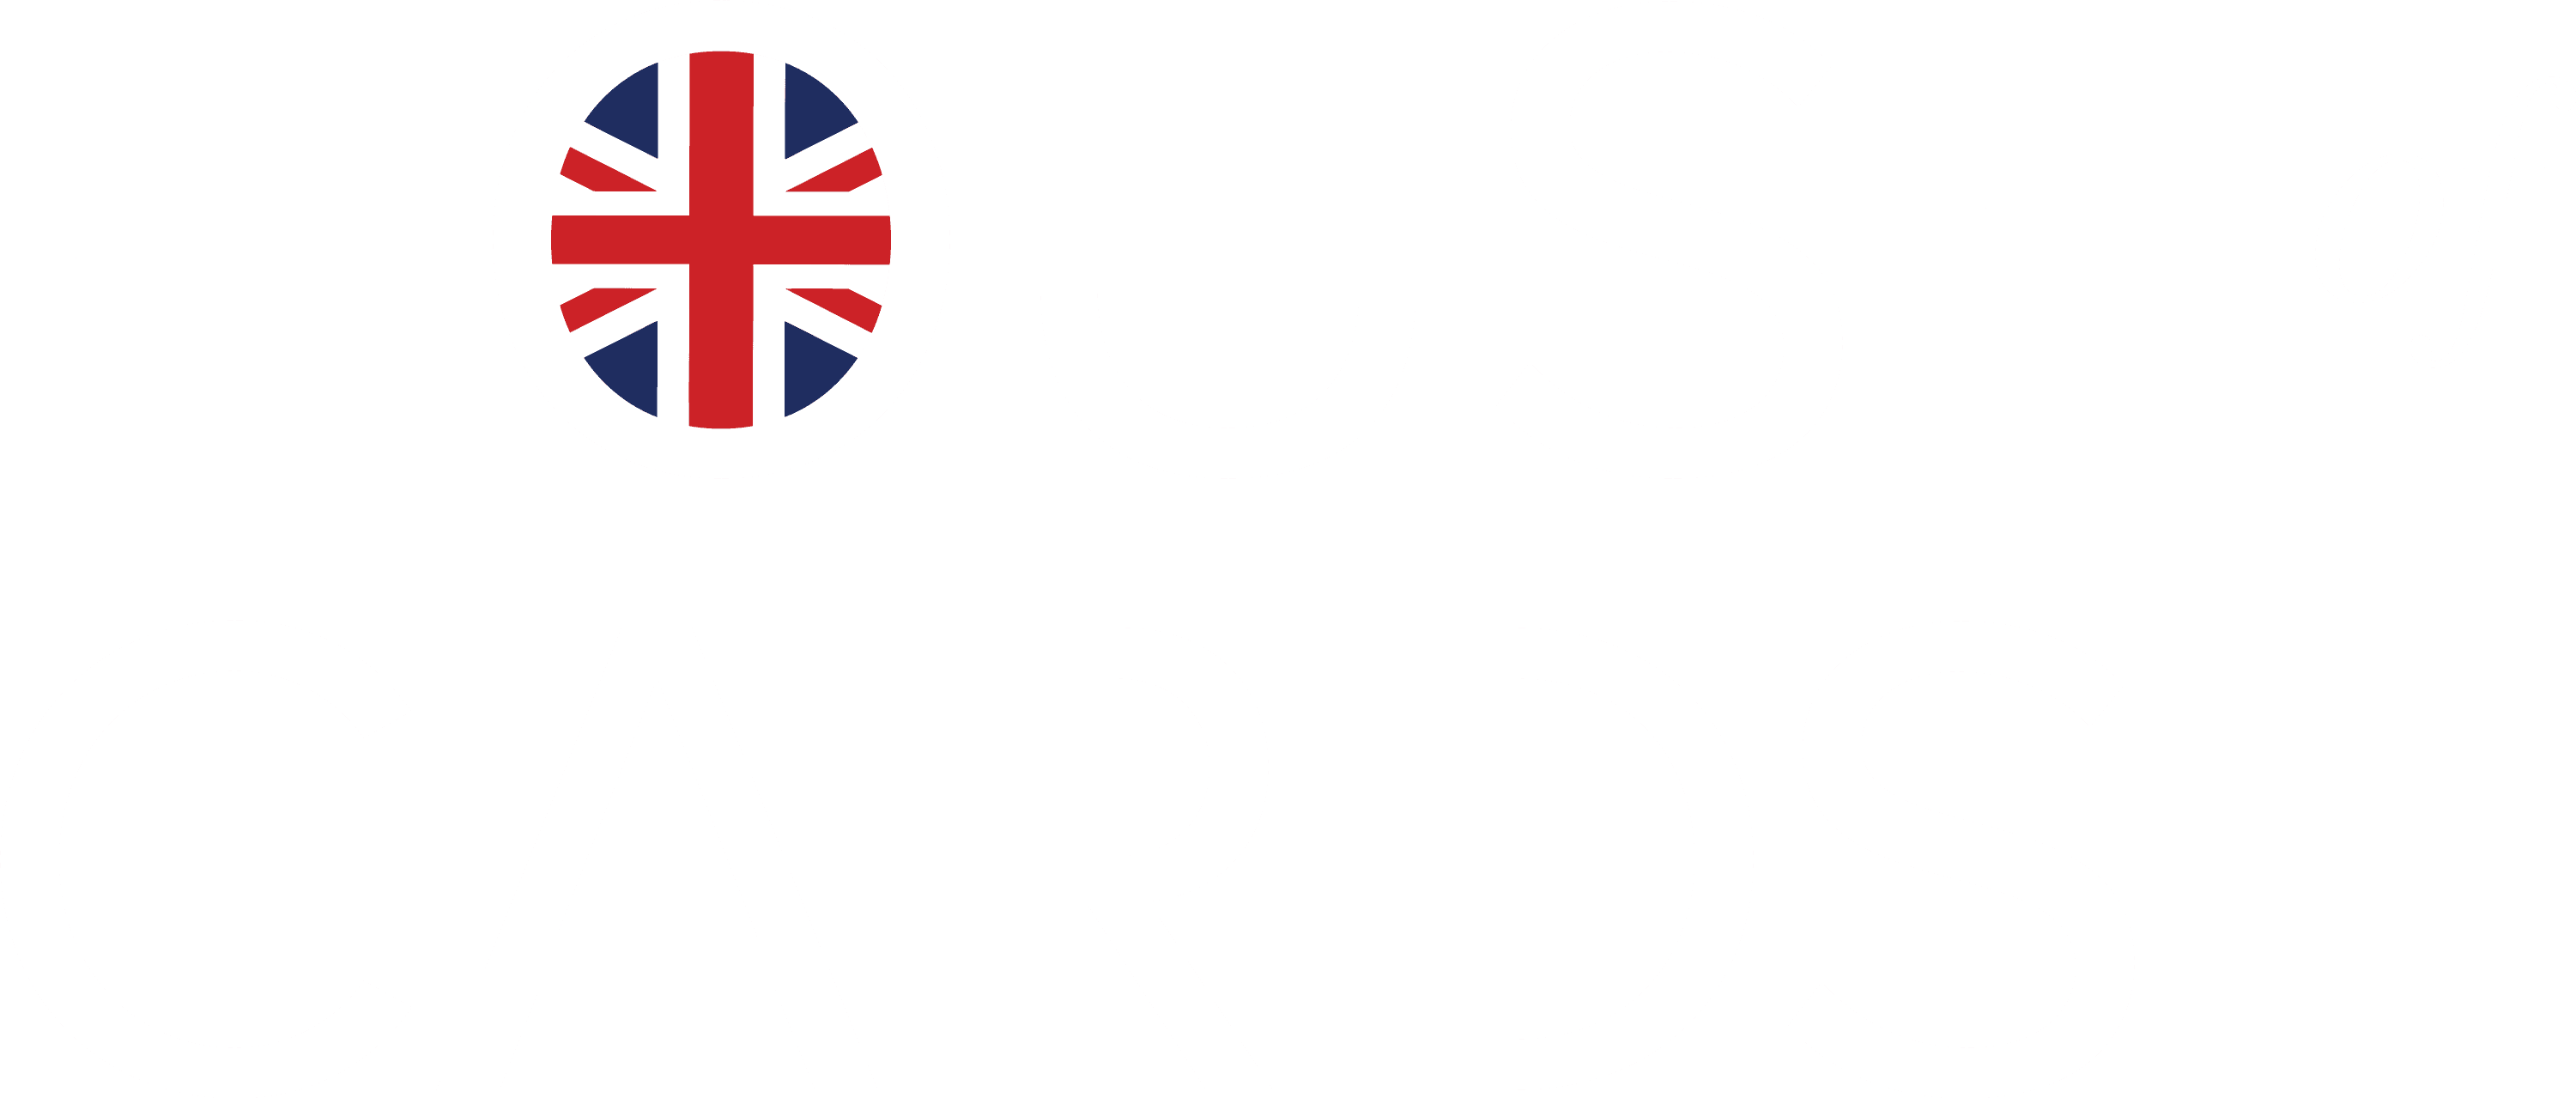 House of Cards logo